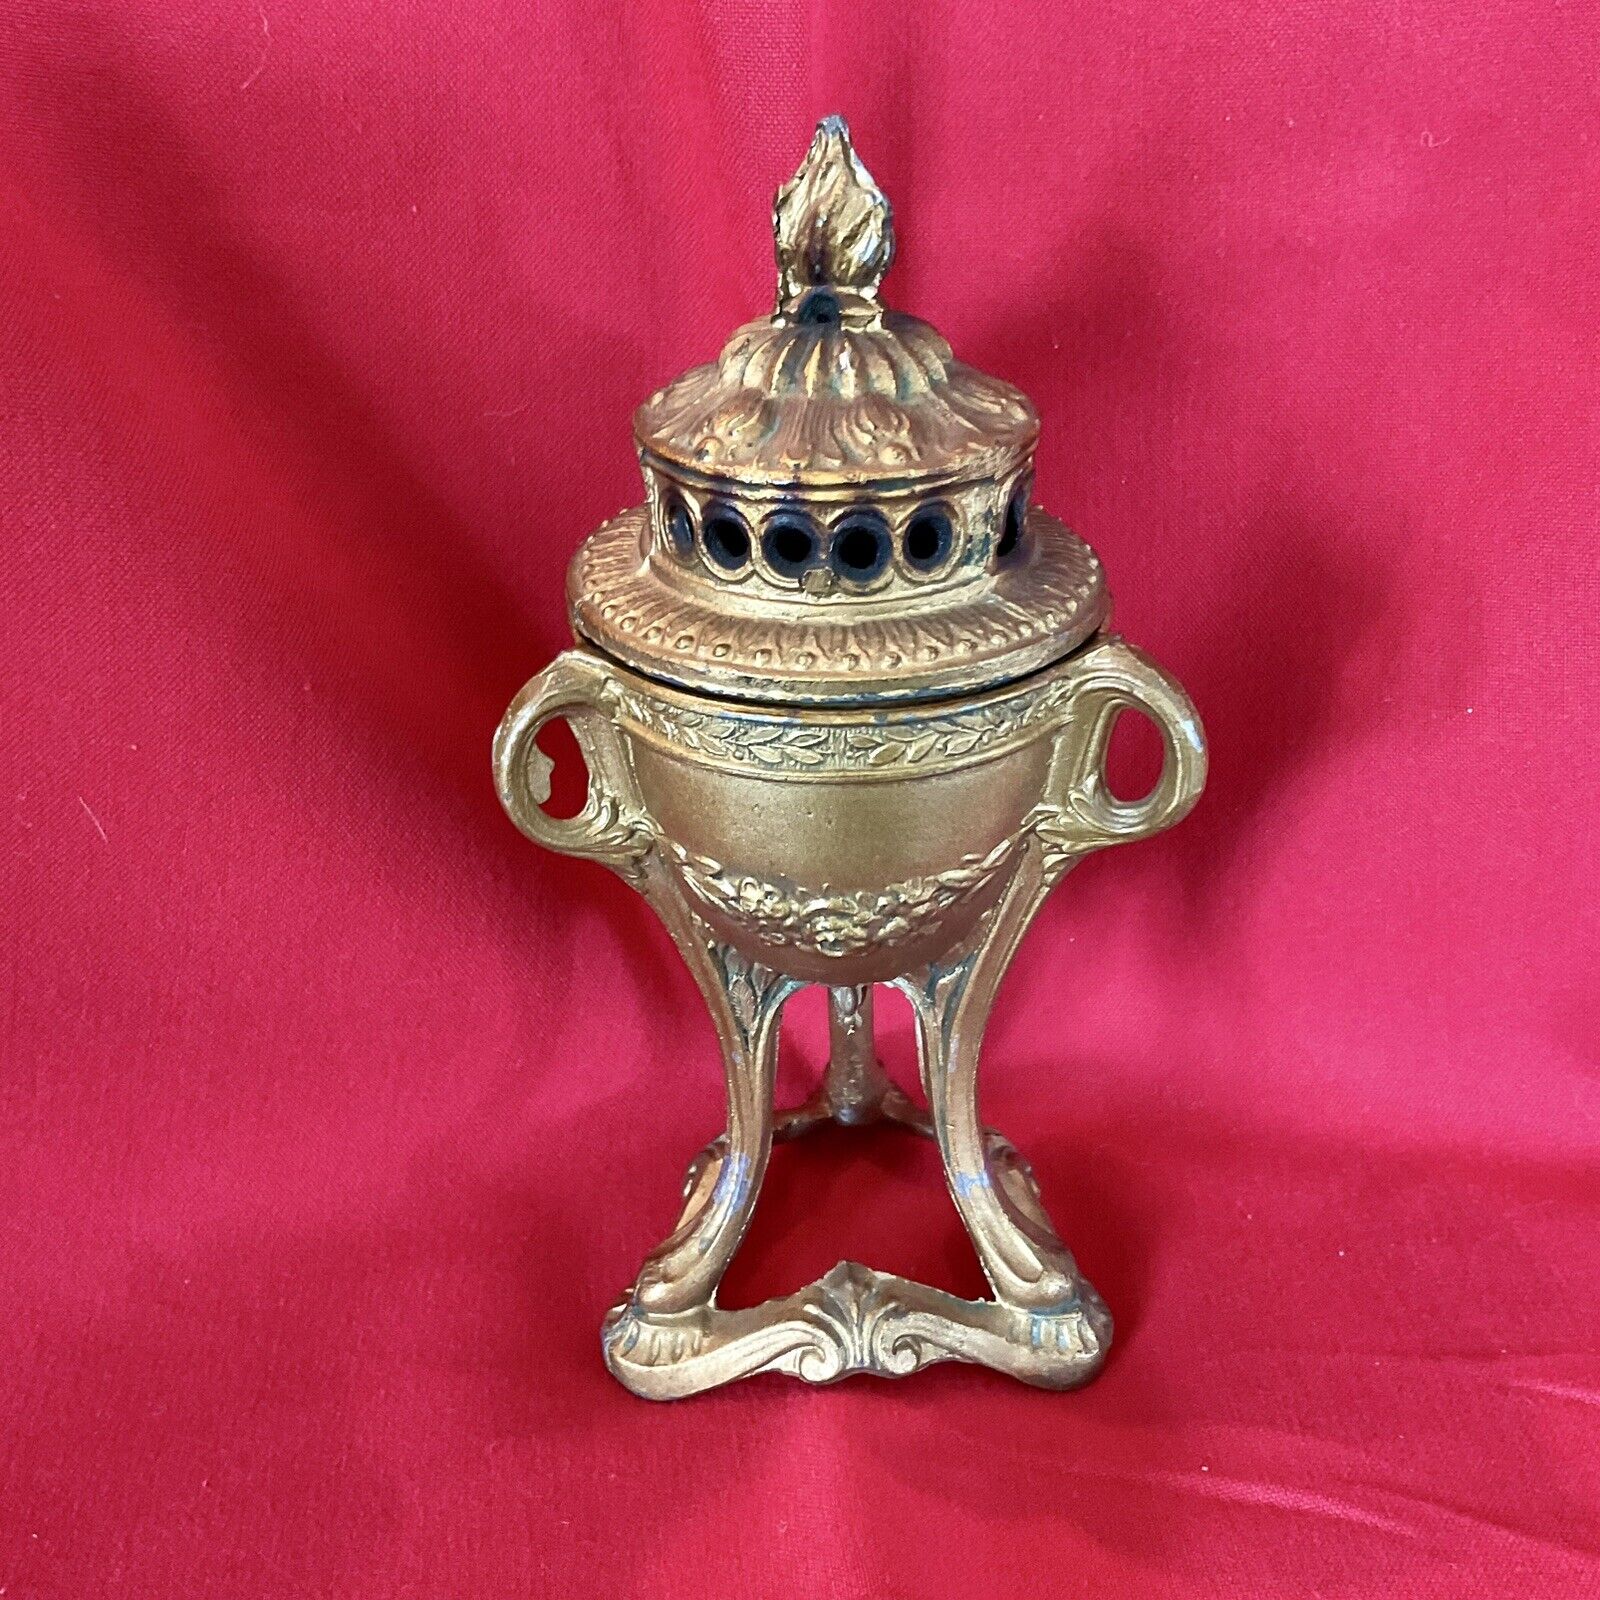 RARE Vintage Middle East Incense burner urn w/top brass/iron 6”t,neoclassical